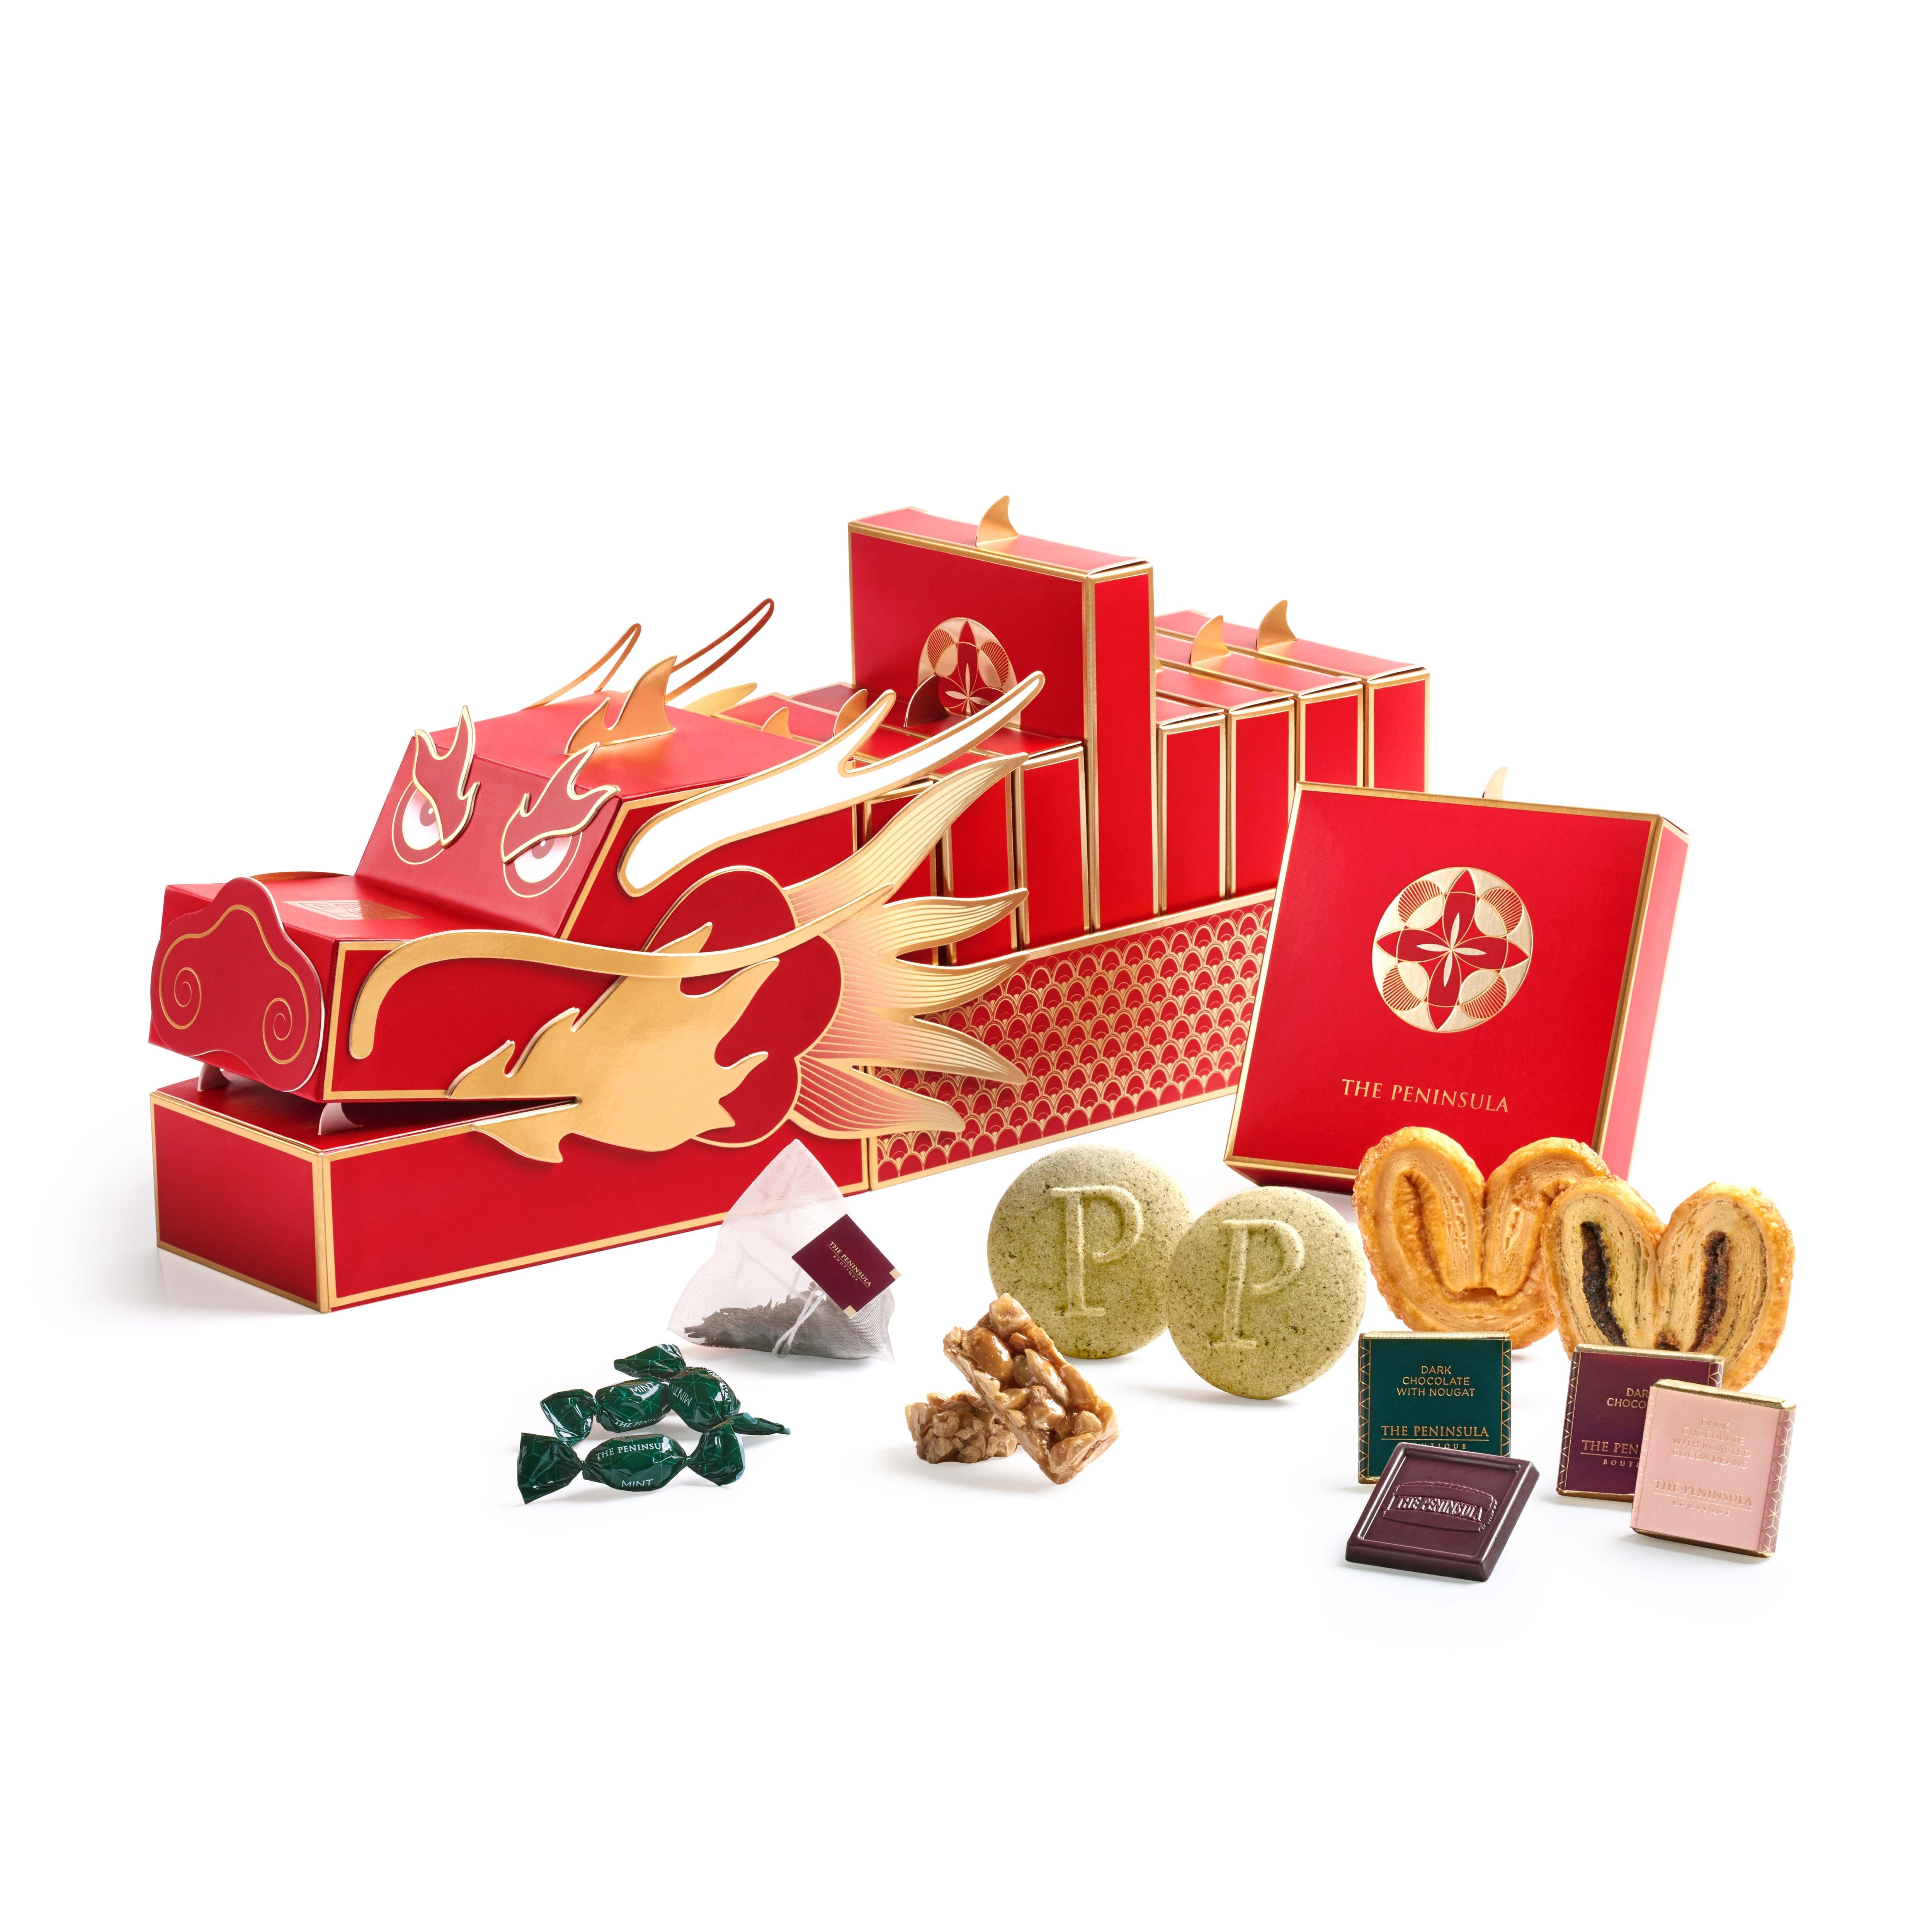 [JLL Offer] The Peninsula Boutique | Prosperous Dragon Gift Box (Physical Coupon)